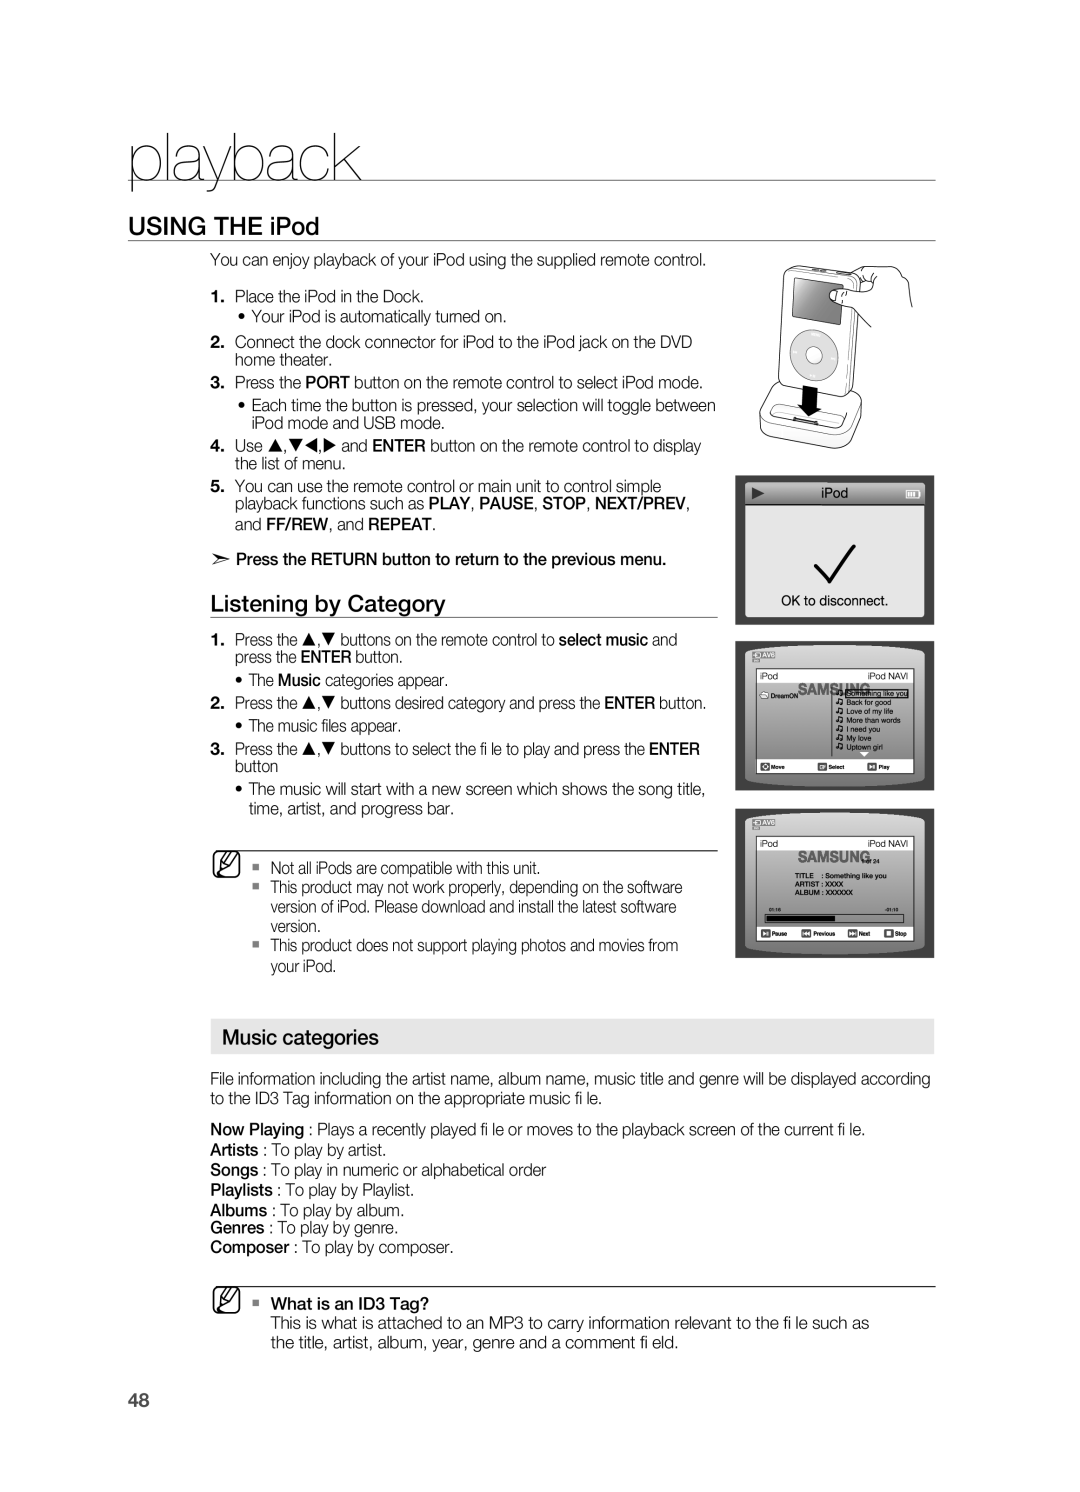 Samsung HT-TZ312 manual USinG tHE iPod, Listening by Category, music categories, playback 